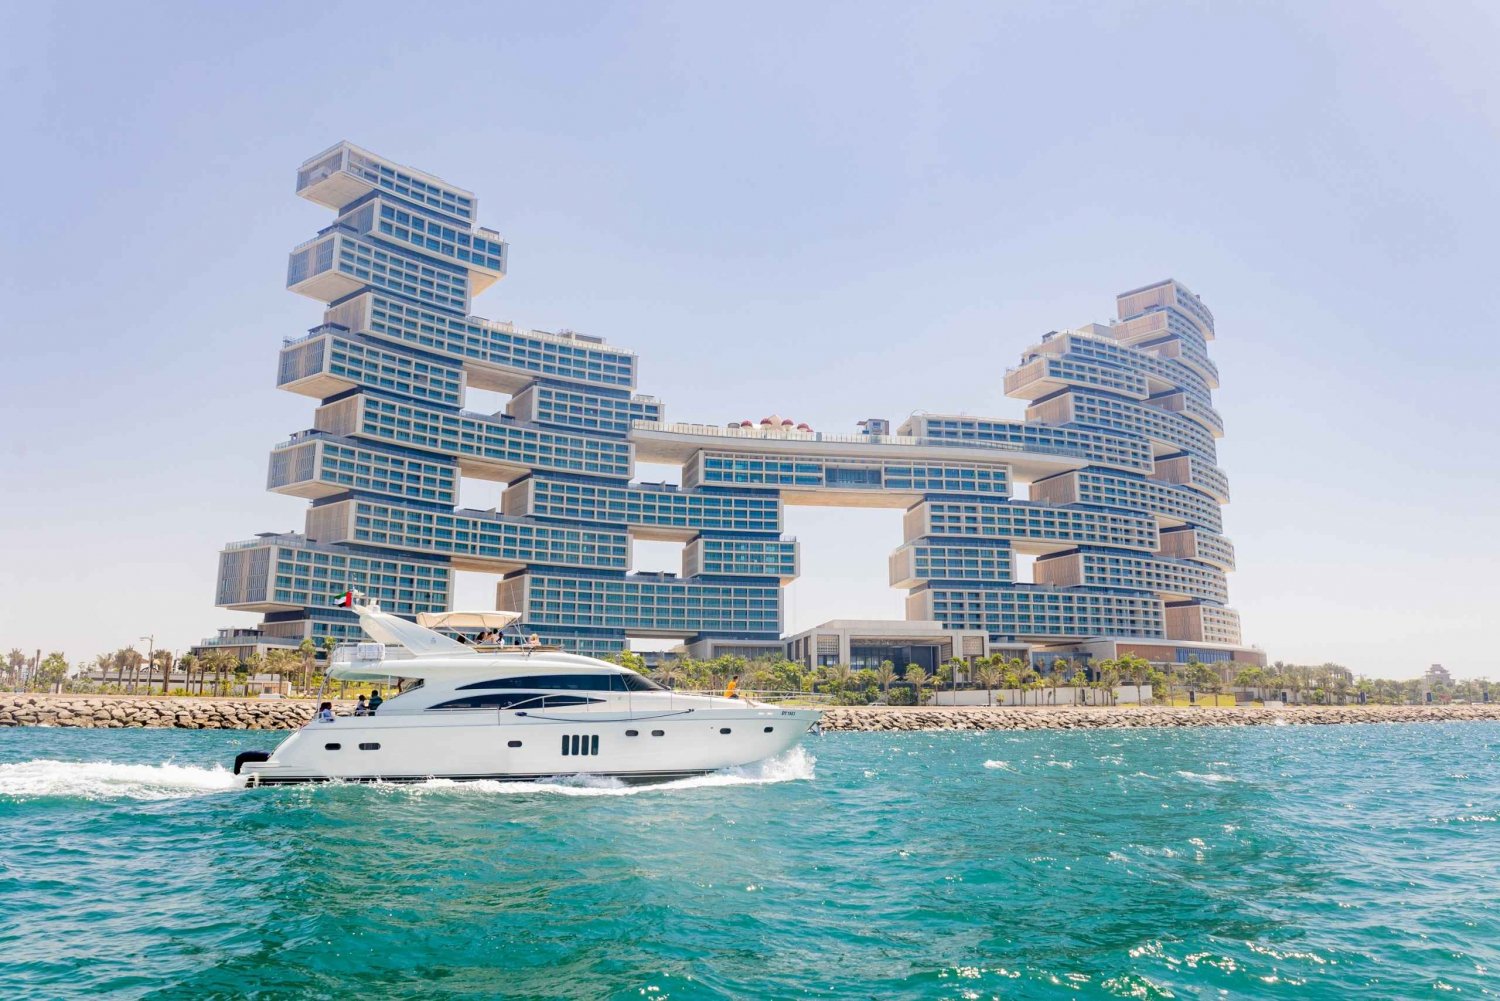 Dubai: Luxury Yacht Tour with Live BBQ and Drinks